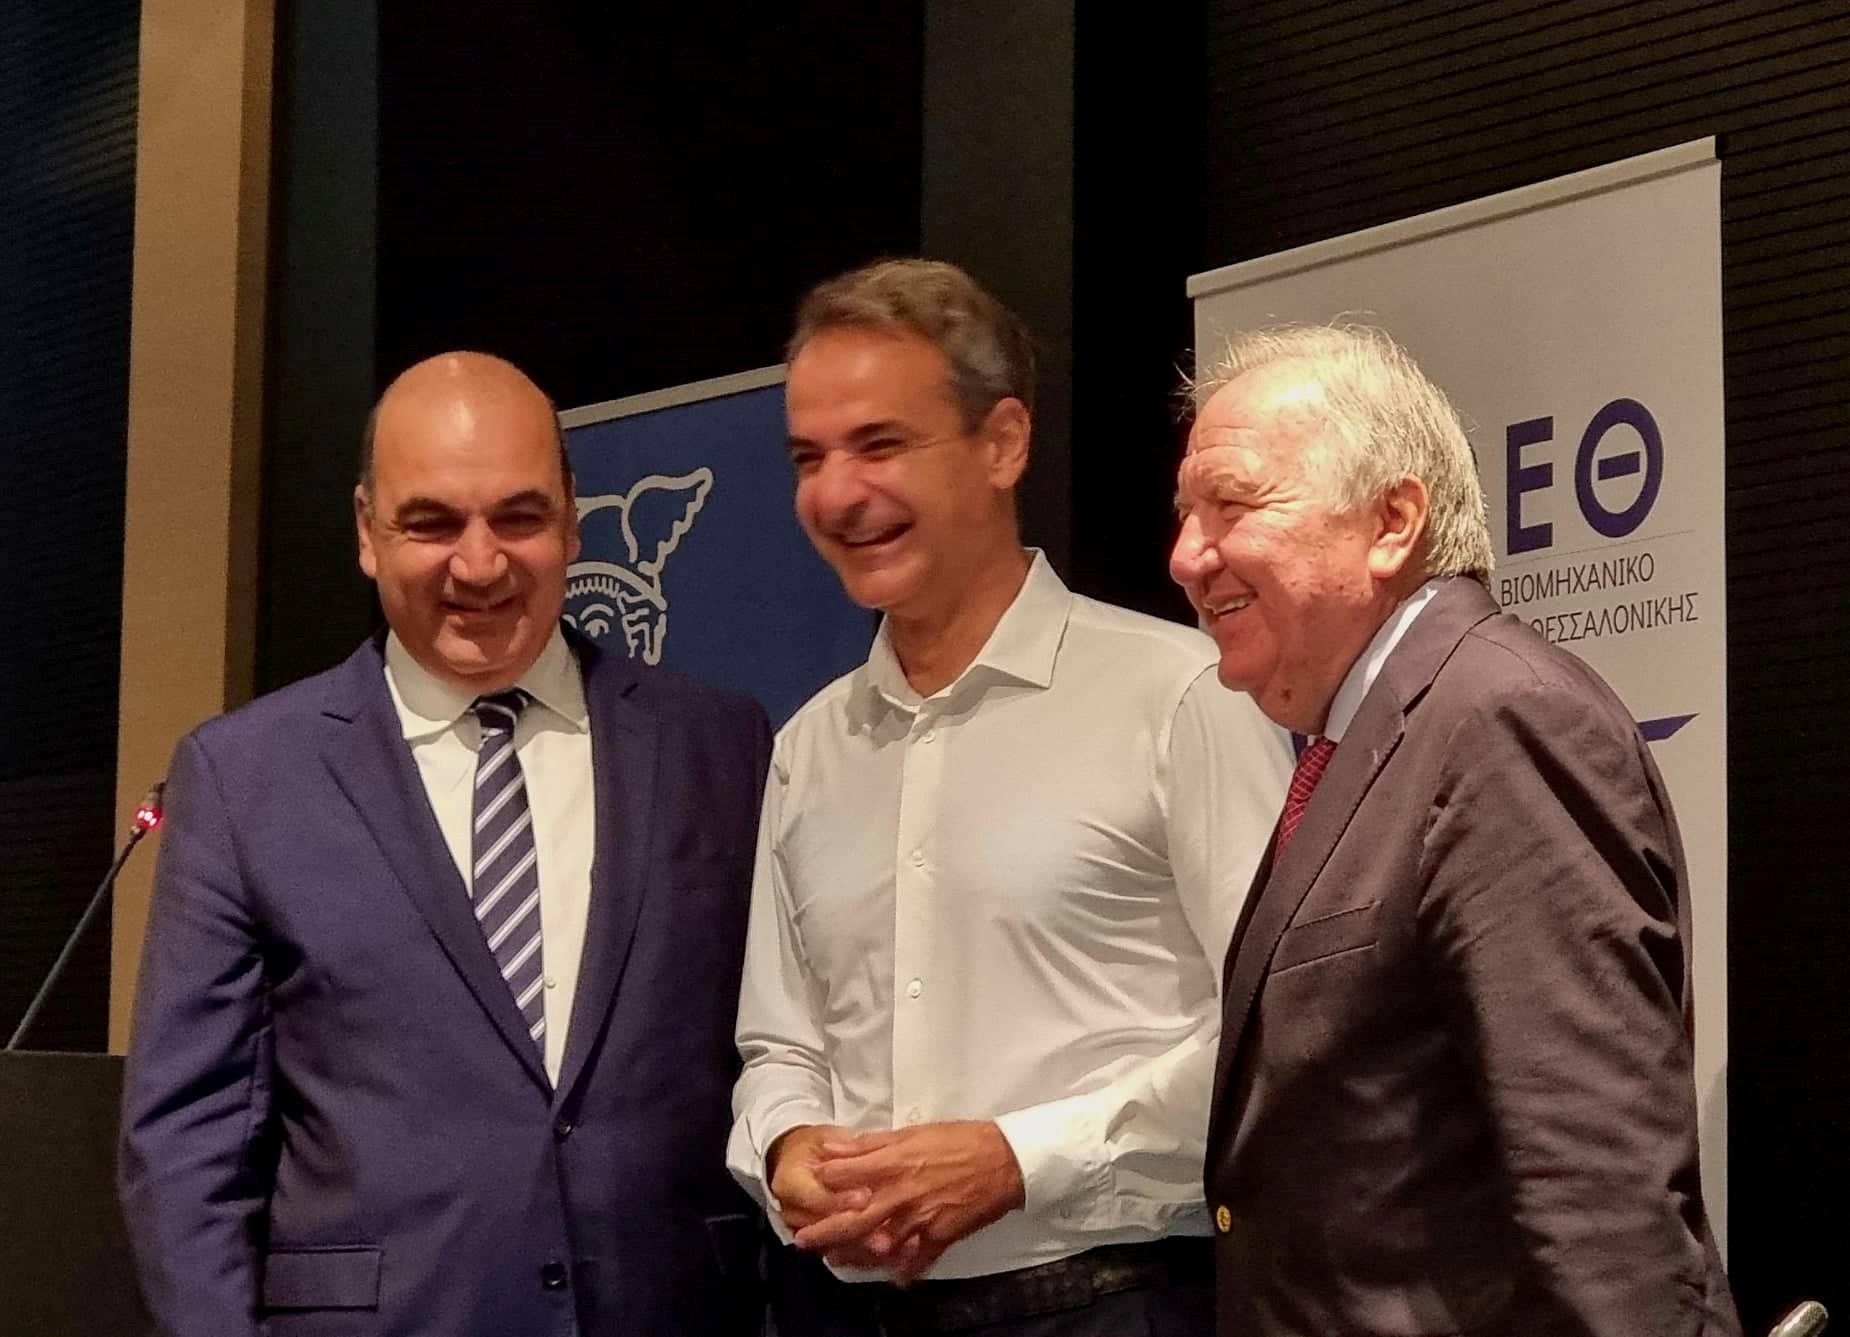 Chamber Prez Masoutis to PM Mitsotakis: Continue to support households and businesses